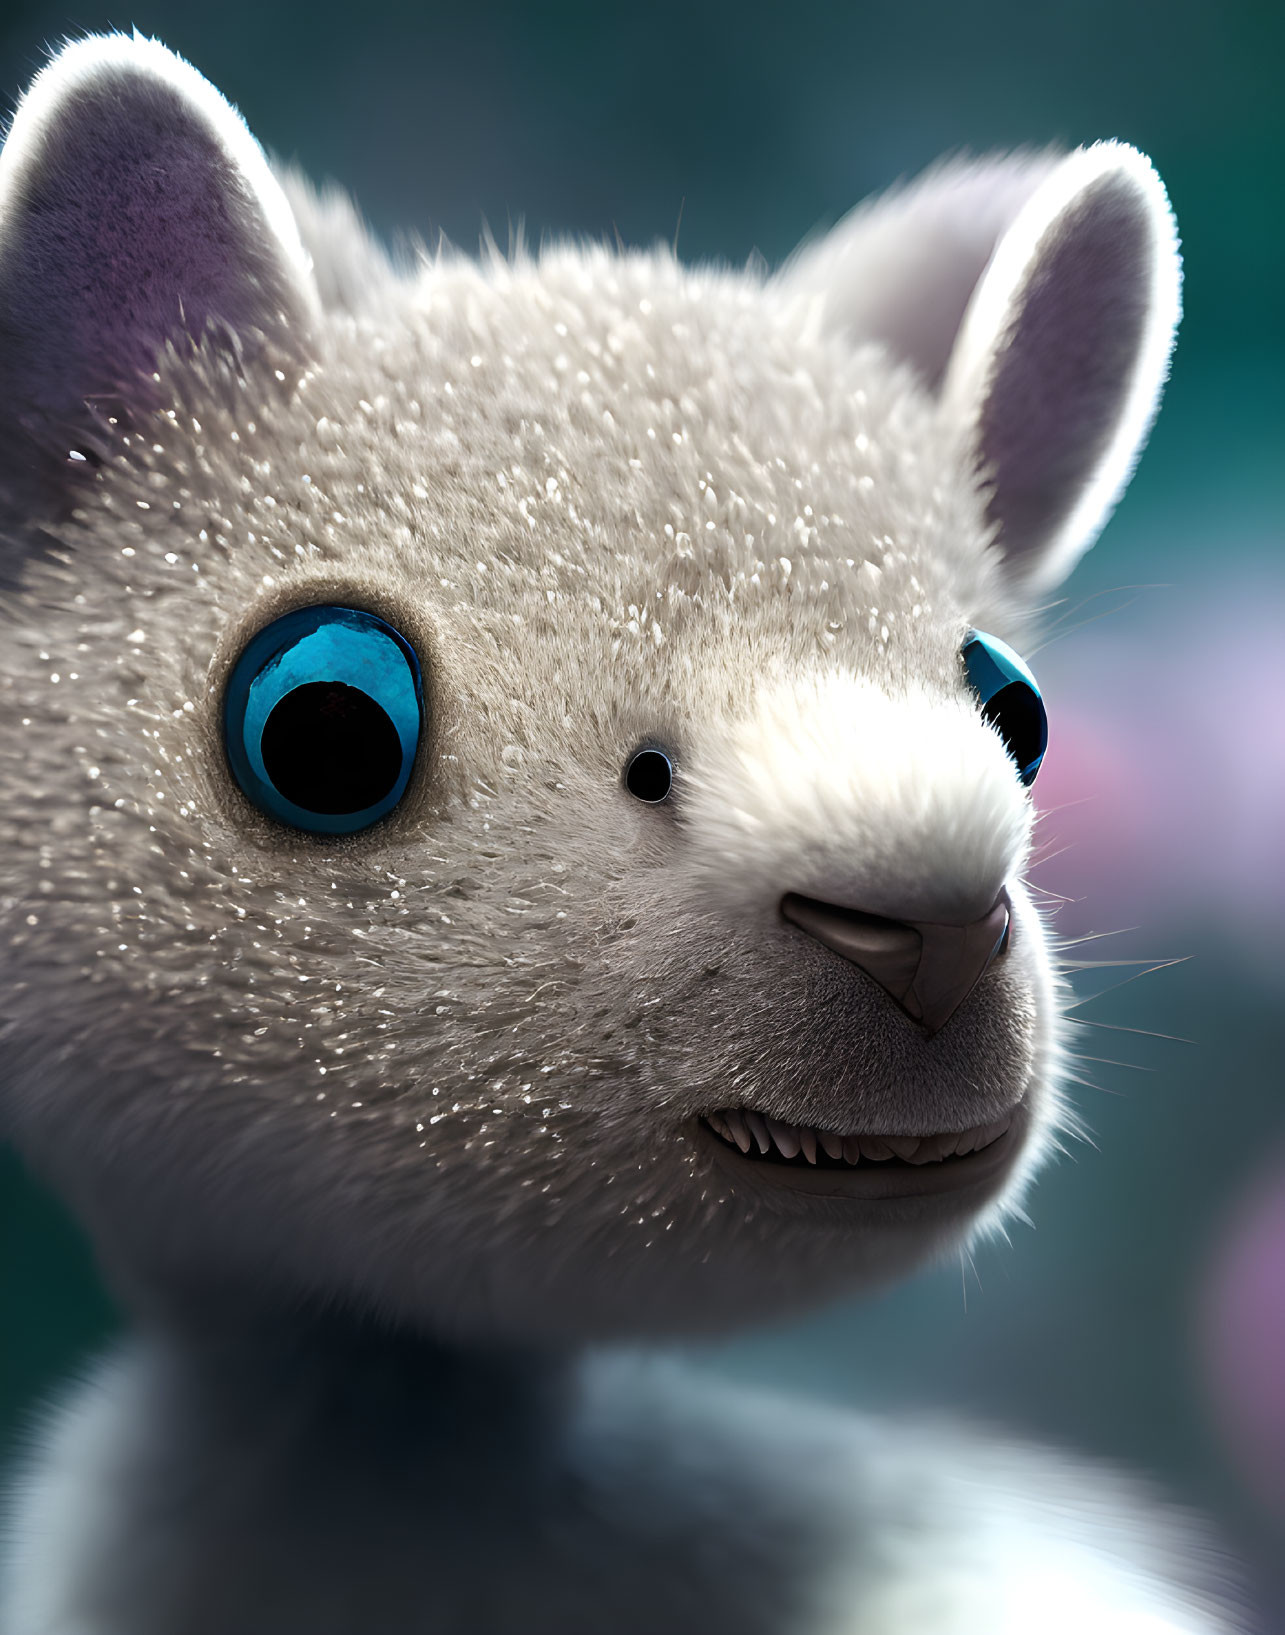 Animated creature with bright blue eyes and cute smile.